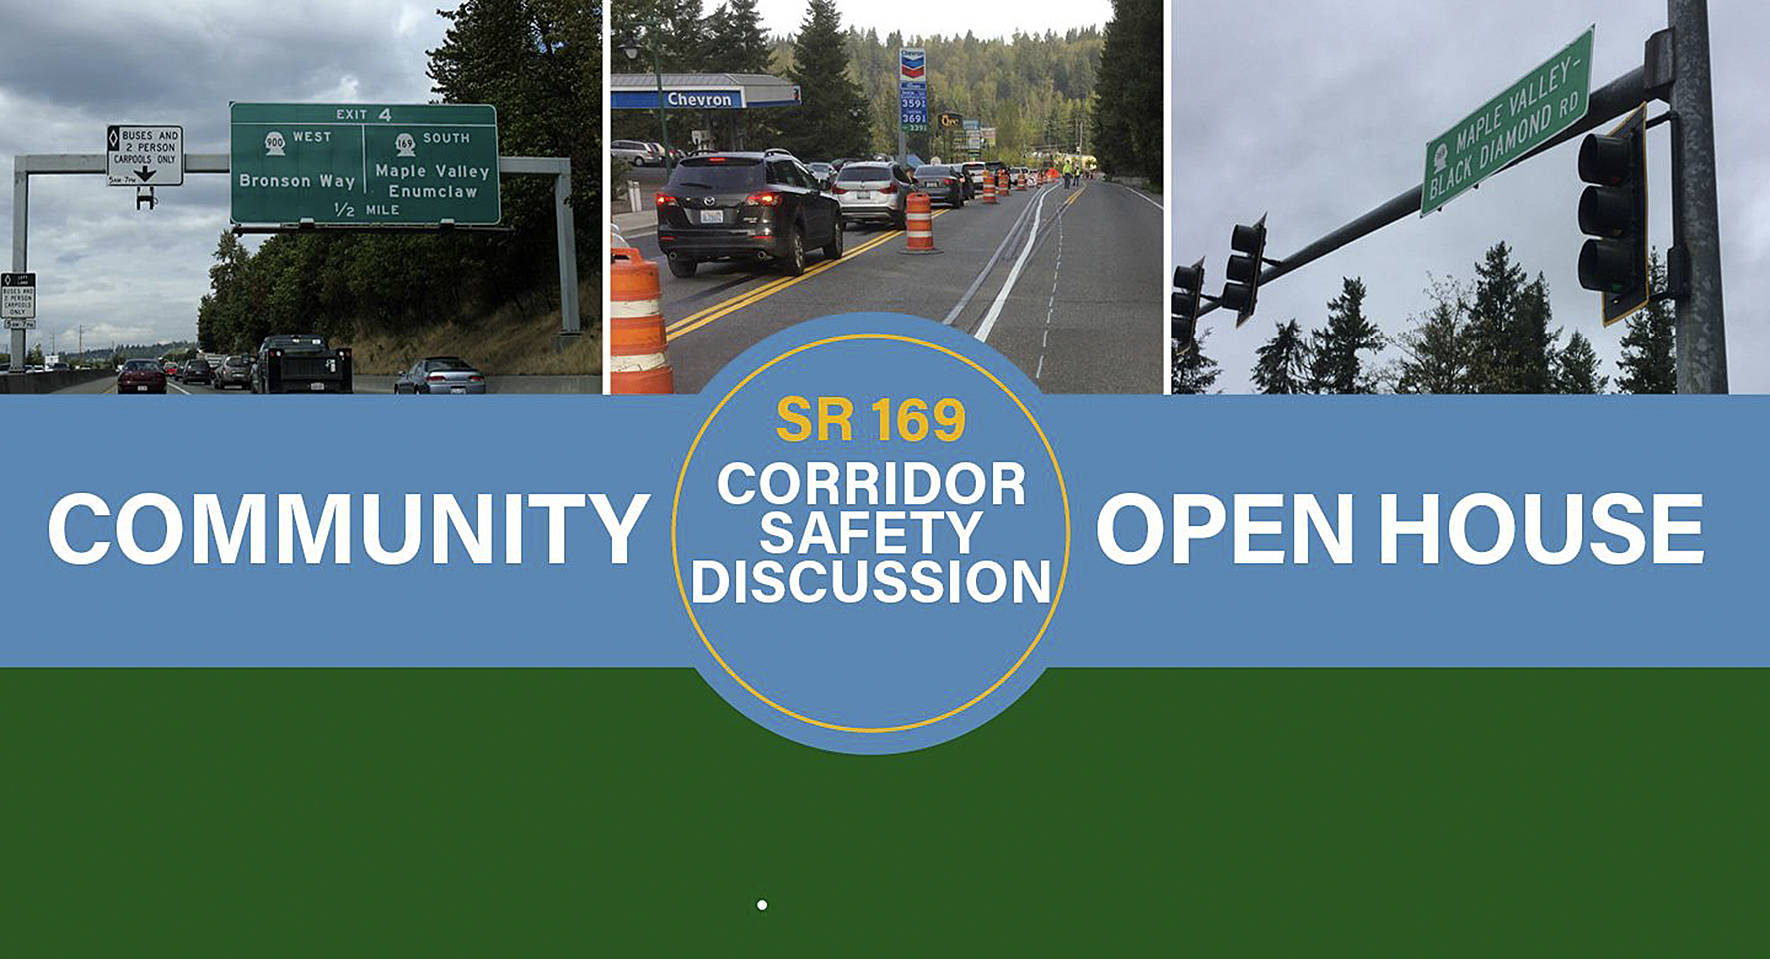 Future of major roadway discussed at open house